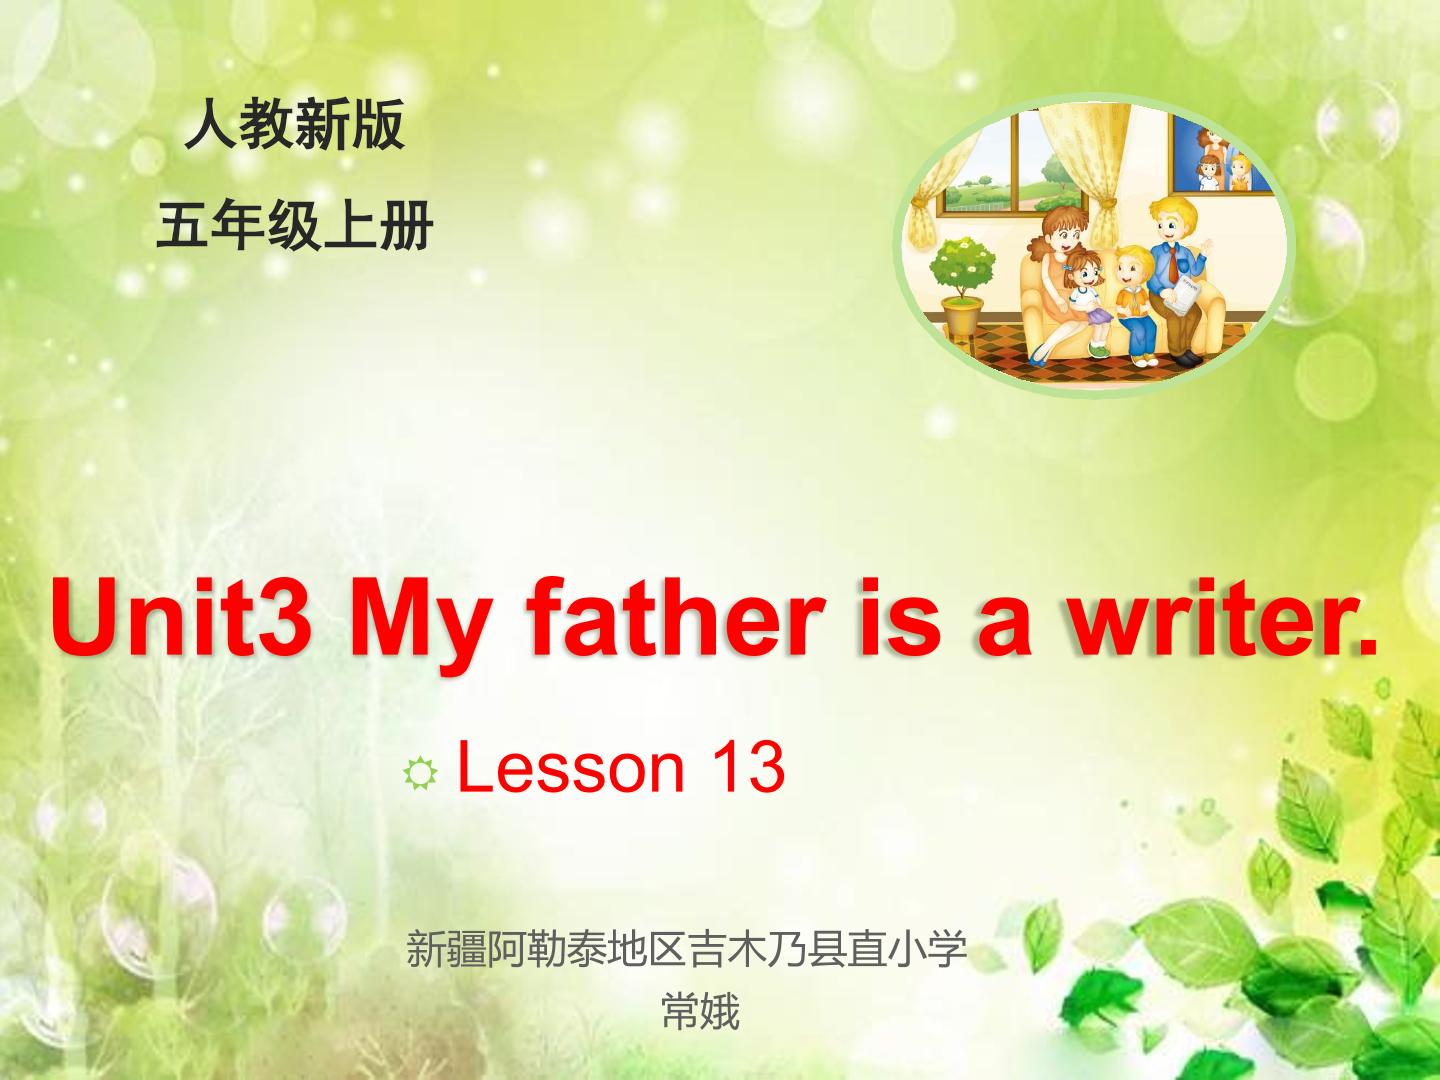 Unit 3 My father is a writer